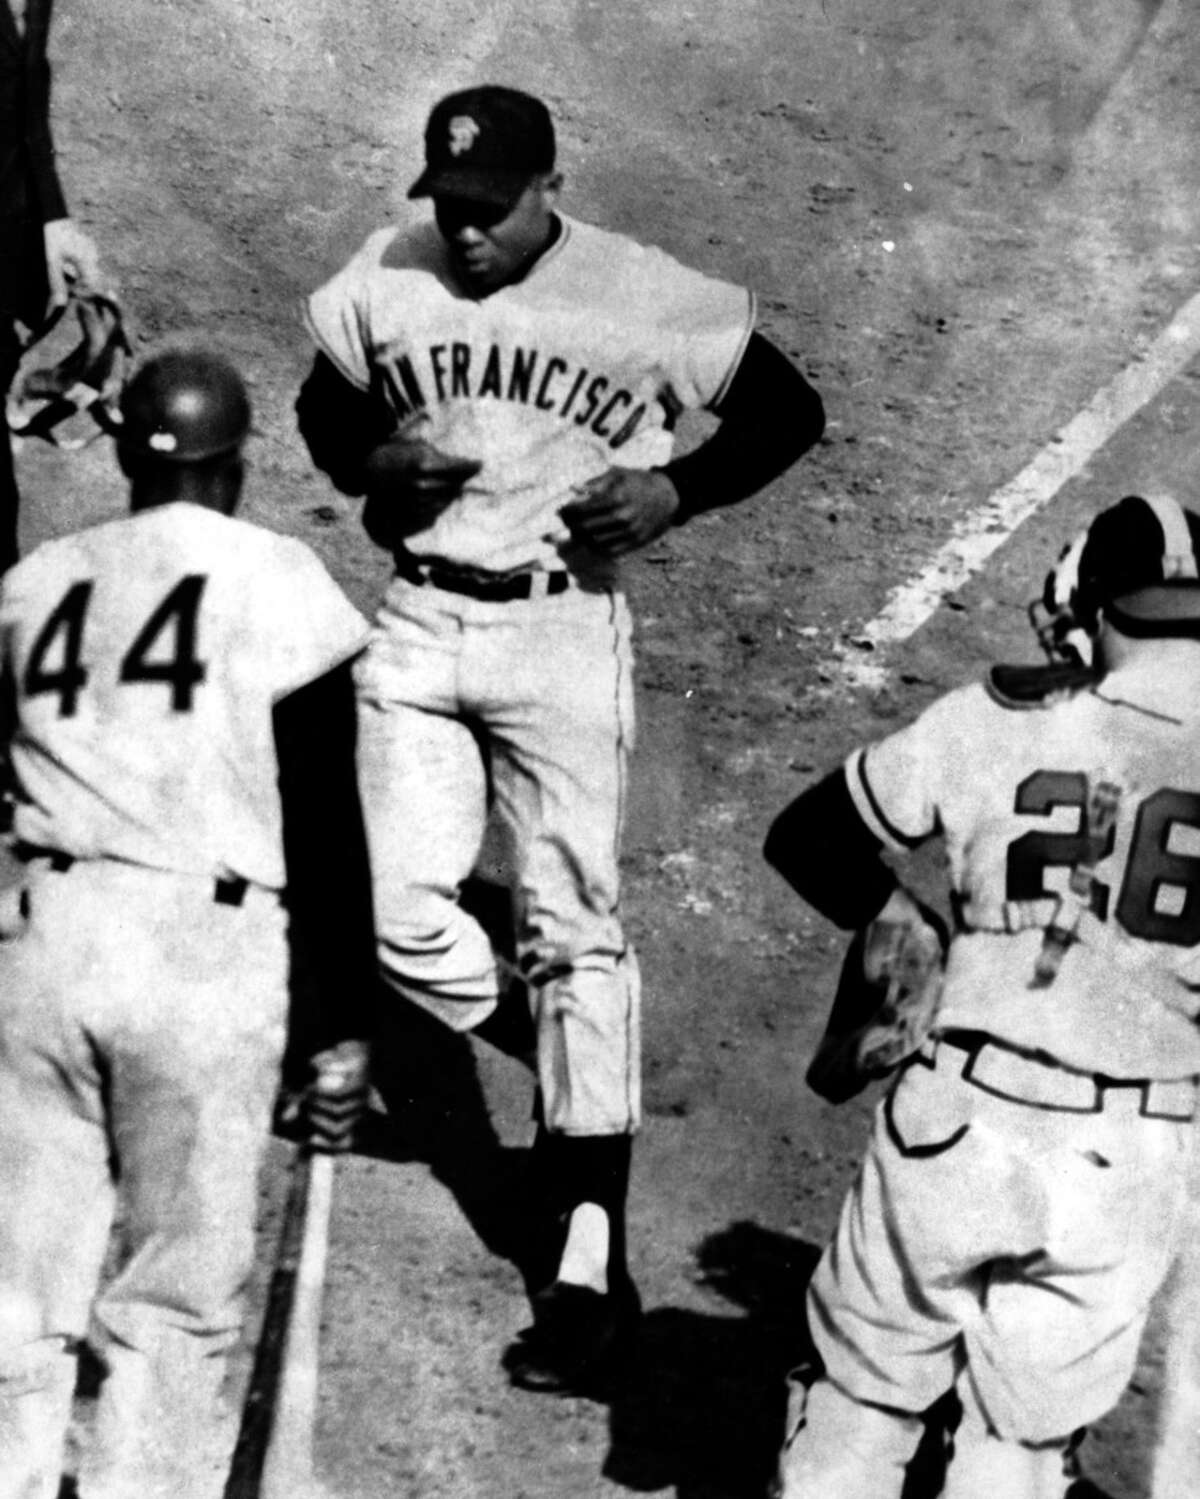 Willie Mays, center, jogs toward home plate after his fourth homer in the eighth inning against the Braves on April 30, 1961 in Milwaukee. Willie McCovey, left, and Braves catcher Hawk Taylor, right, watch the run score.